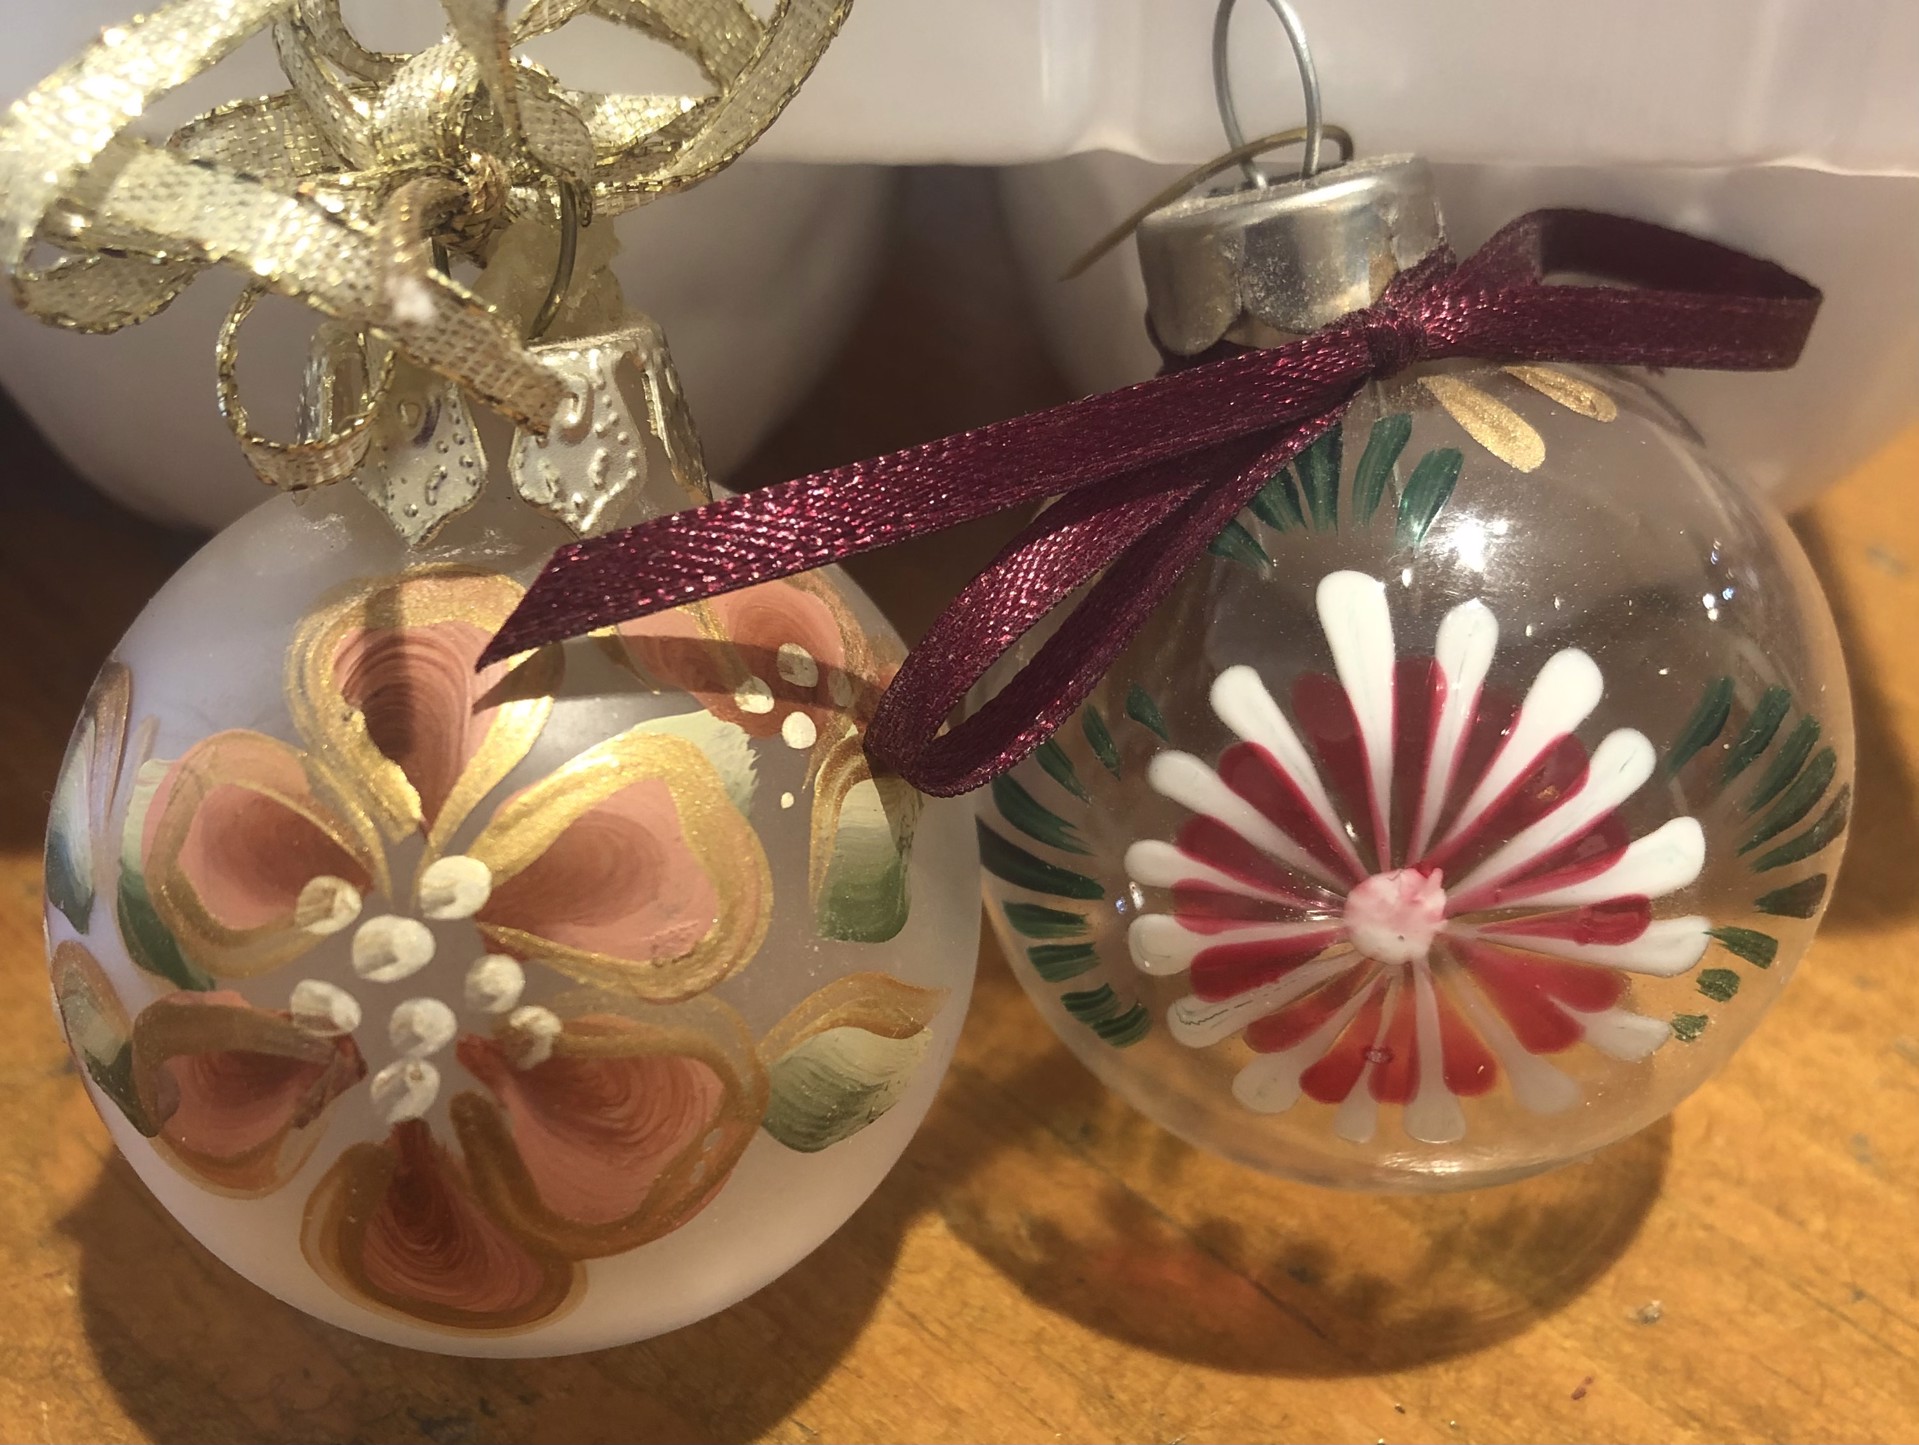 Small glass ornaments by Shirley Malm